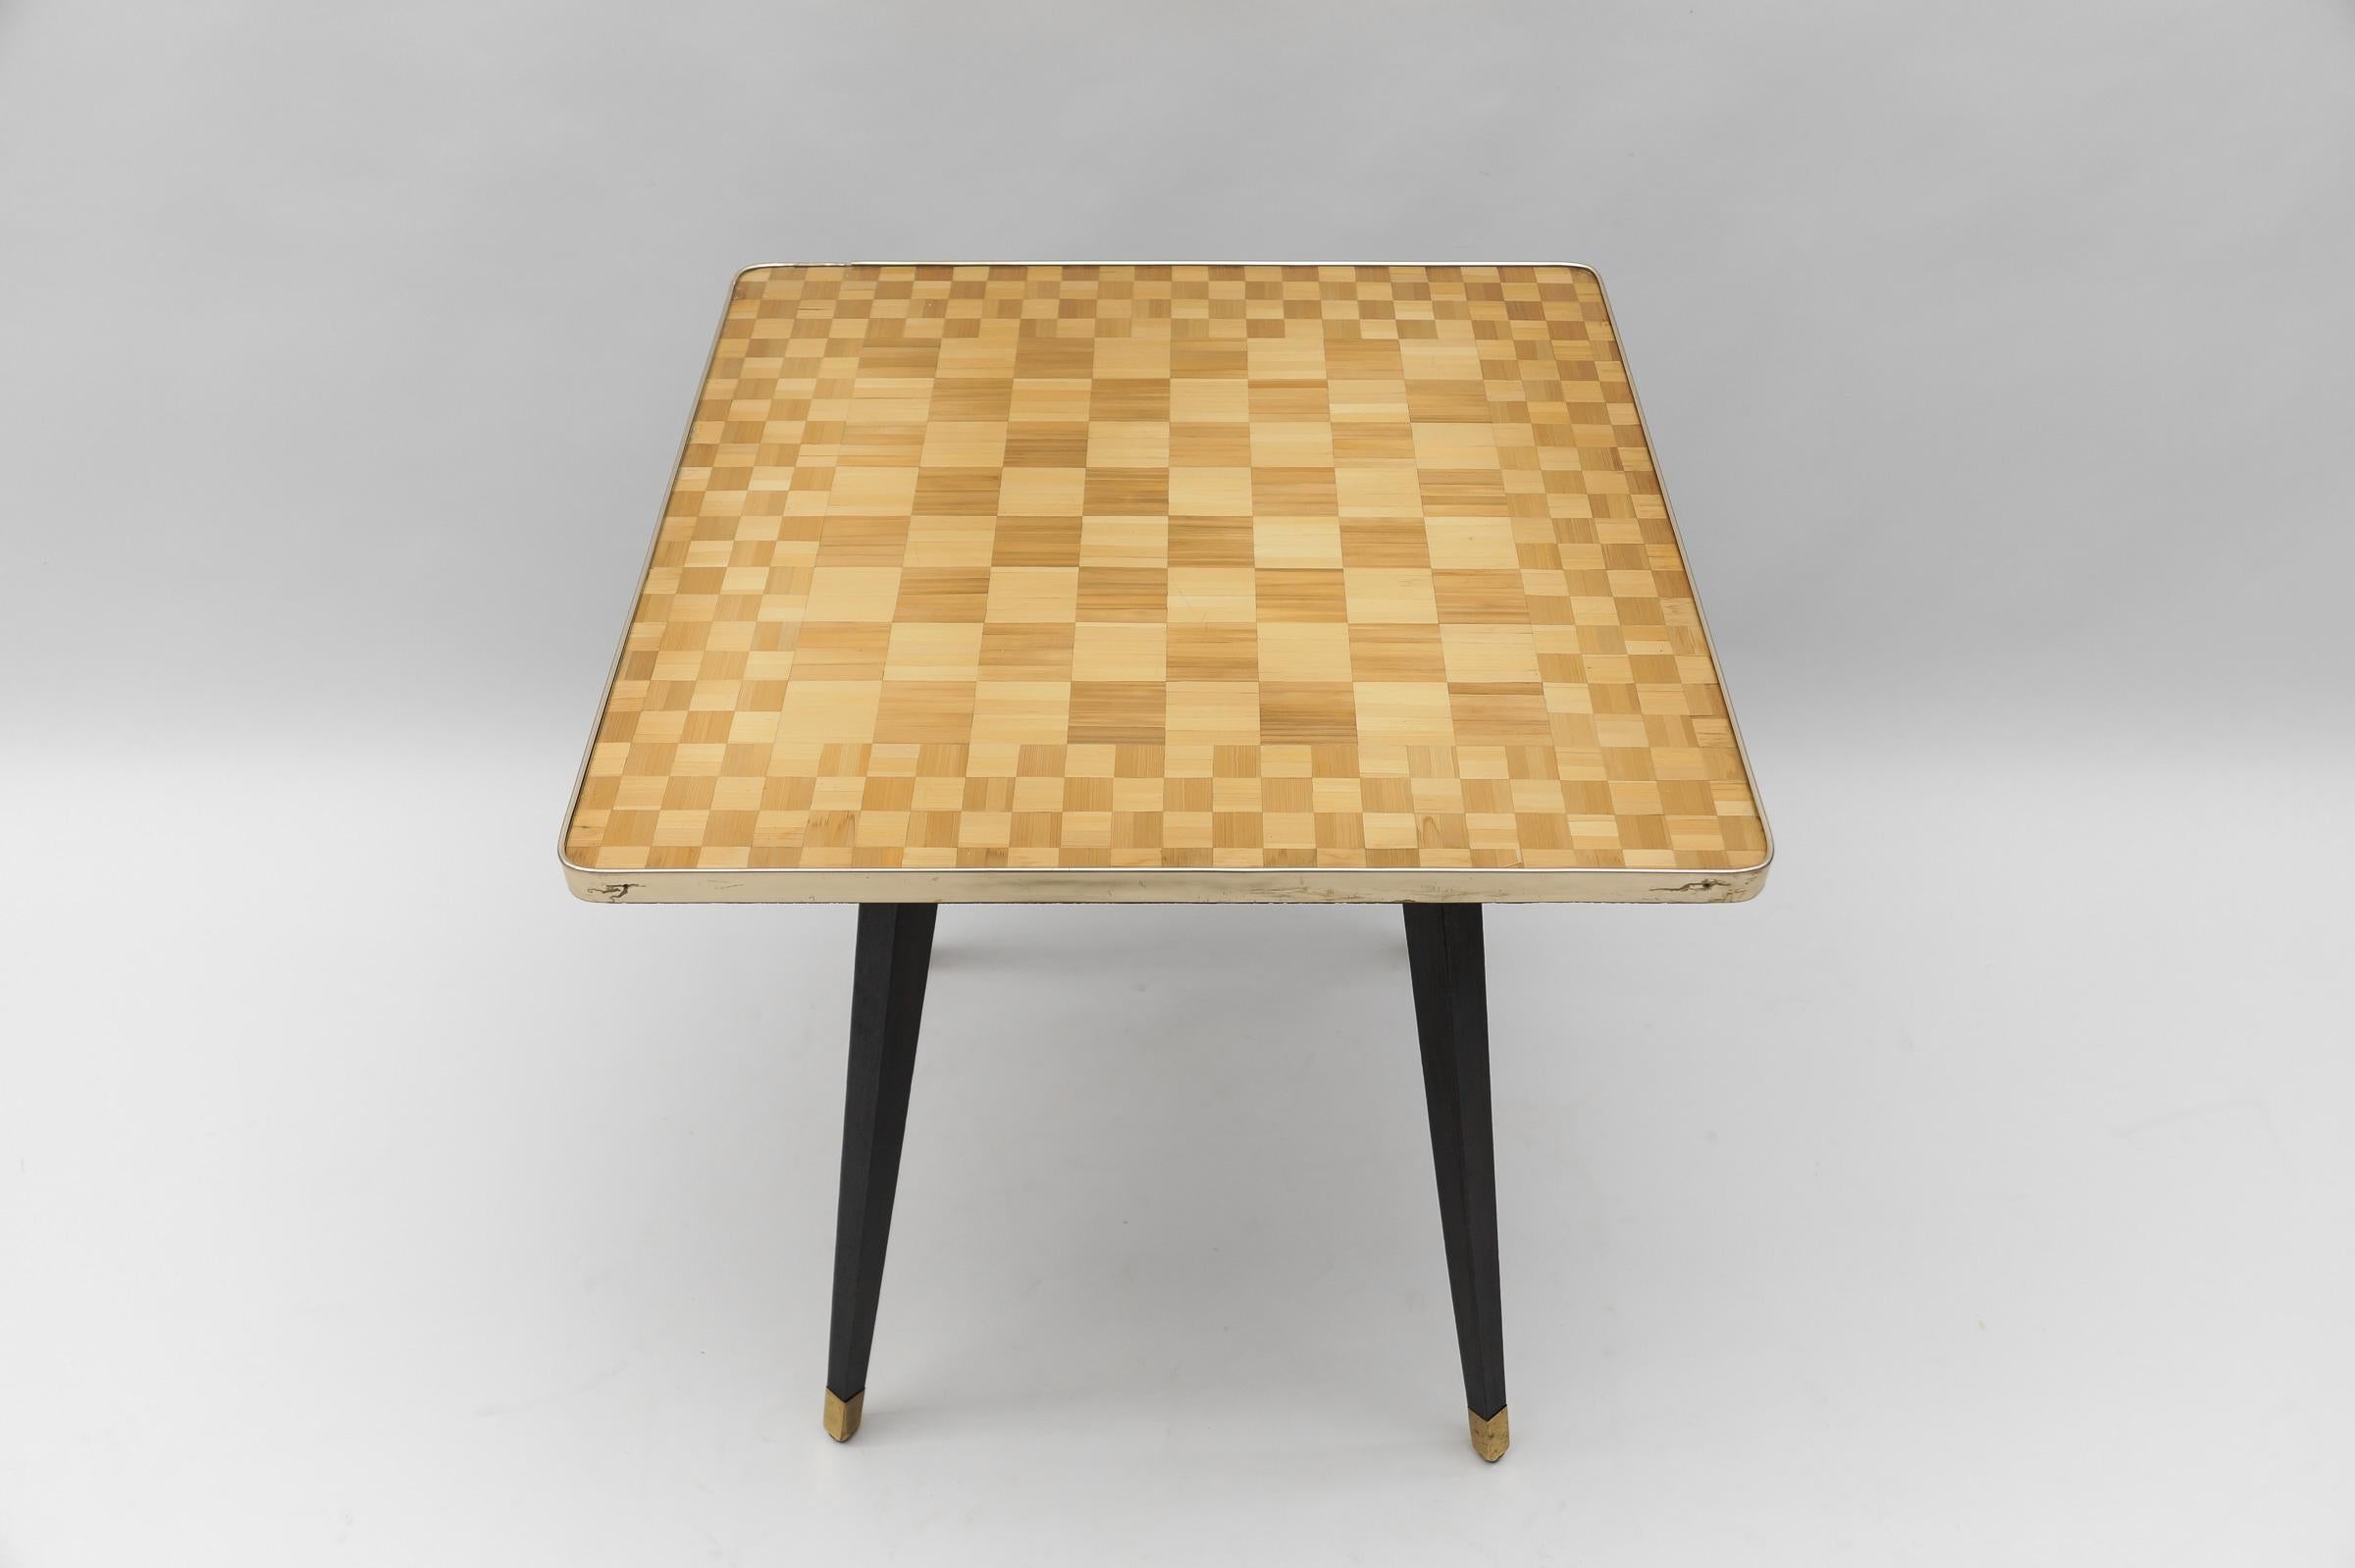 Mid-Century Modern Chess table, Italy, 1950s

One foot has a small brass plate on one side of the square cap and the edge has a few signs of wear.